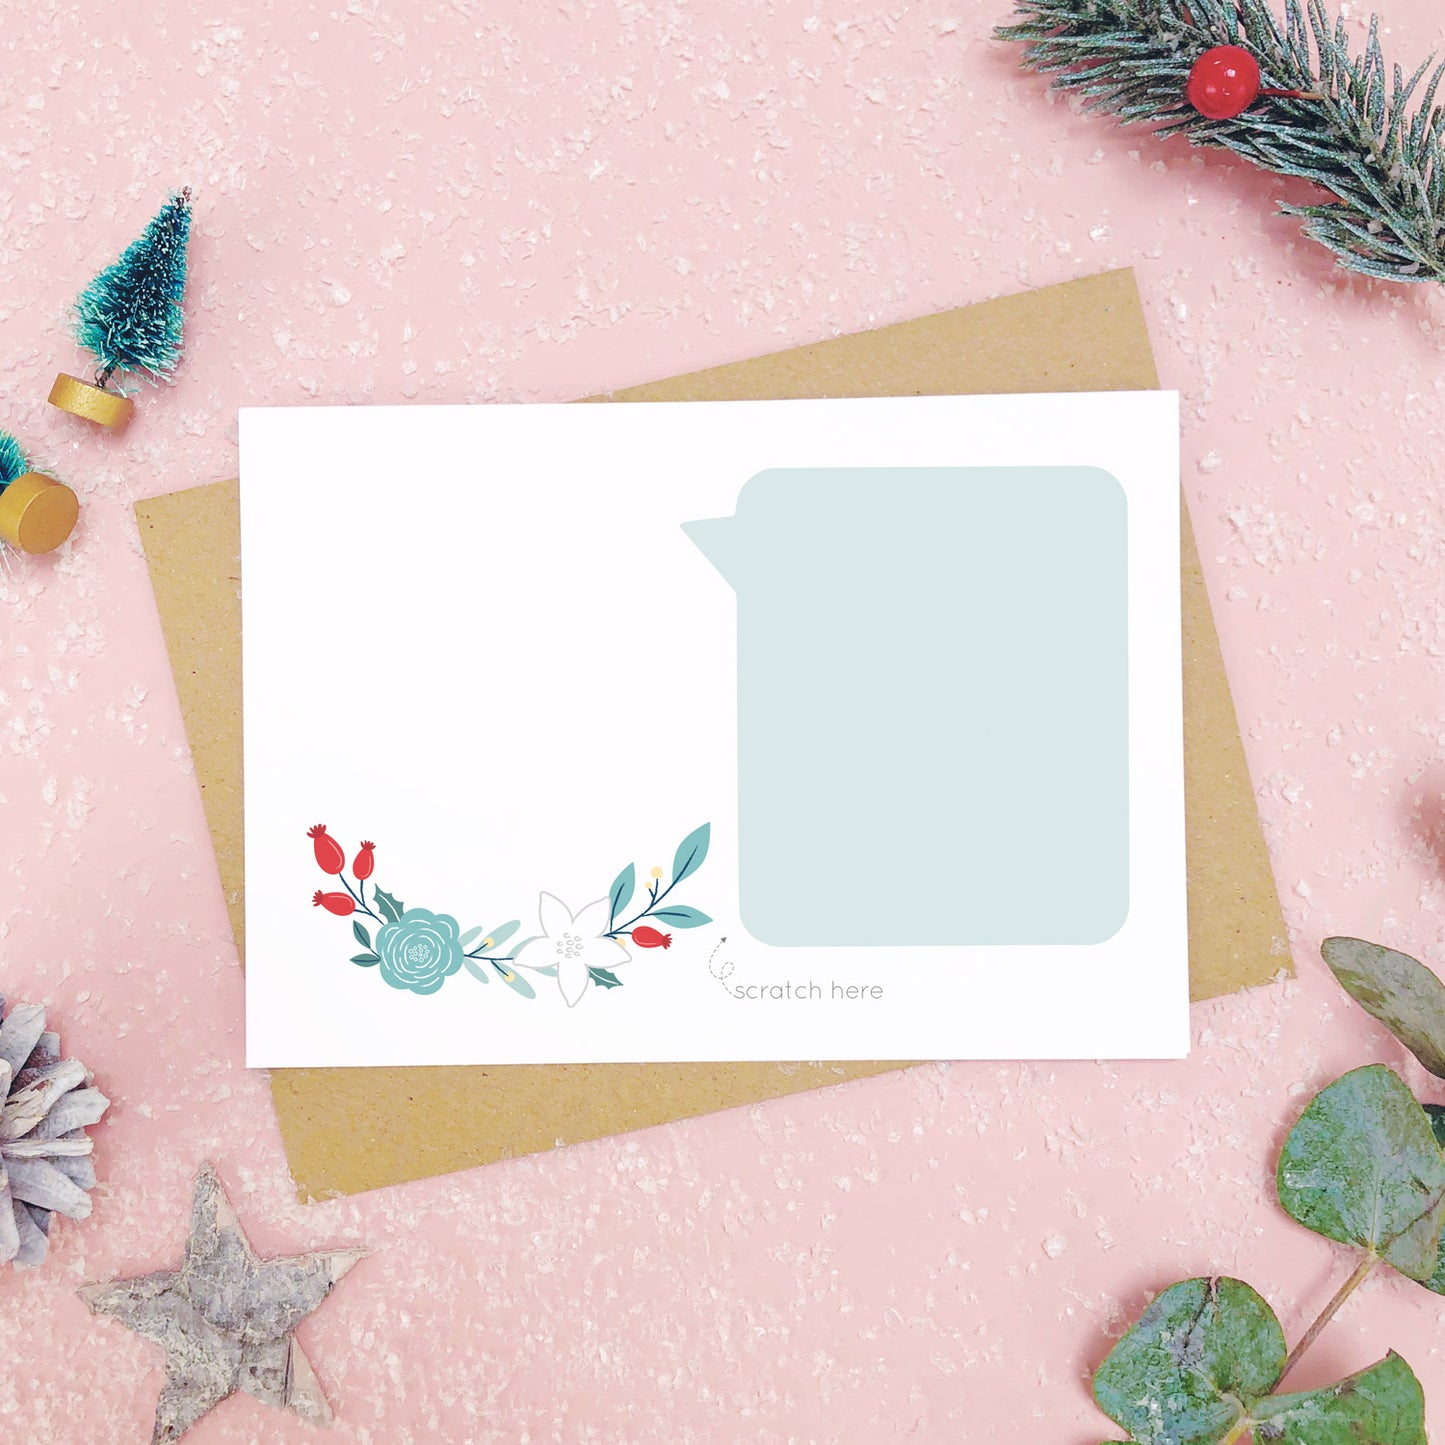 A make your own scratch card with a blank area for drawing and blank speech bubble for writing your message. Shot on pink with snow and greenery.